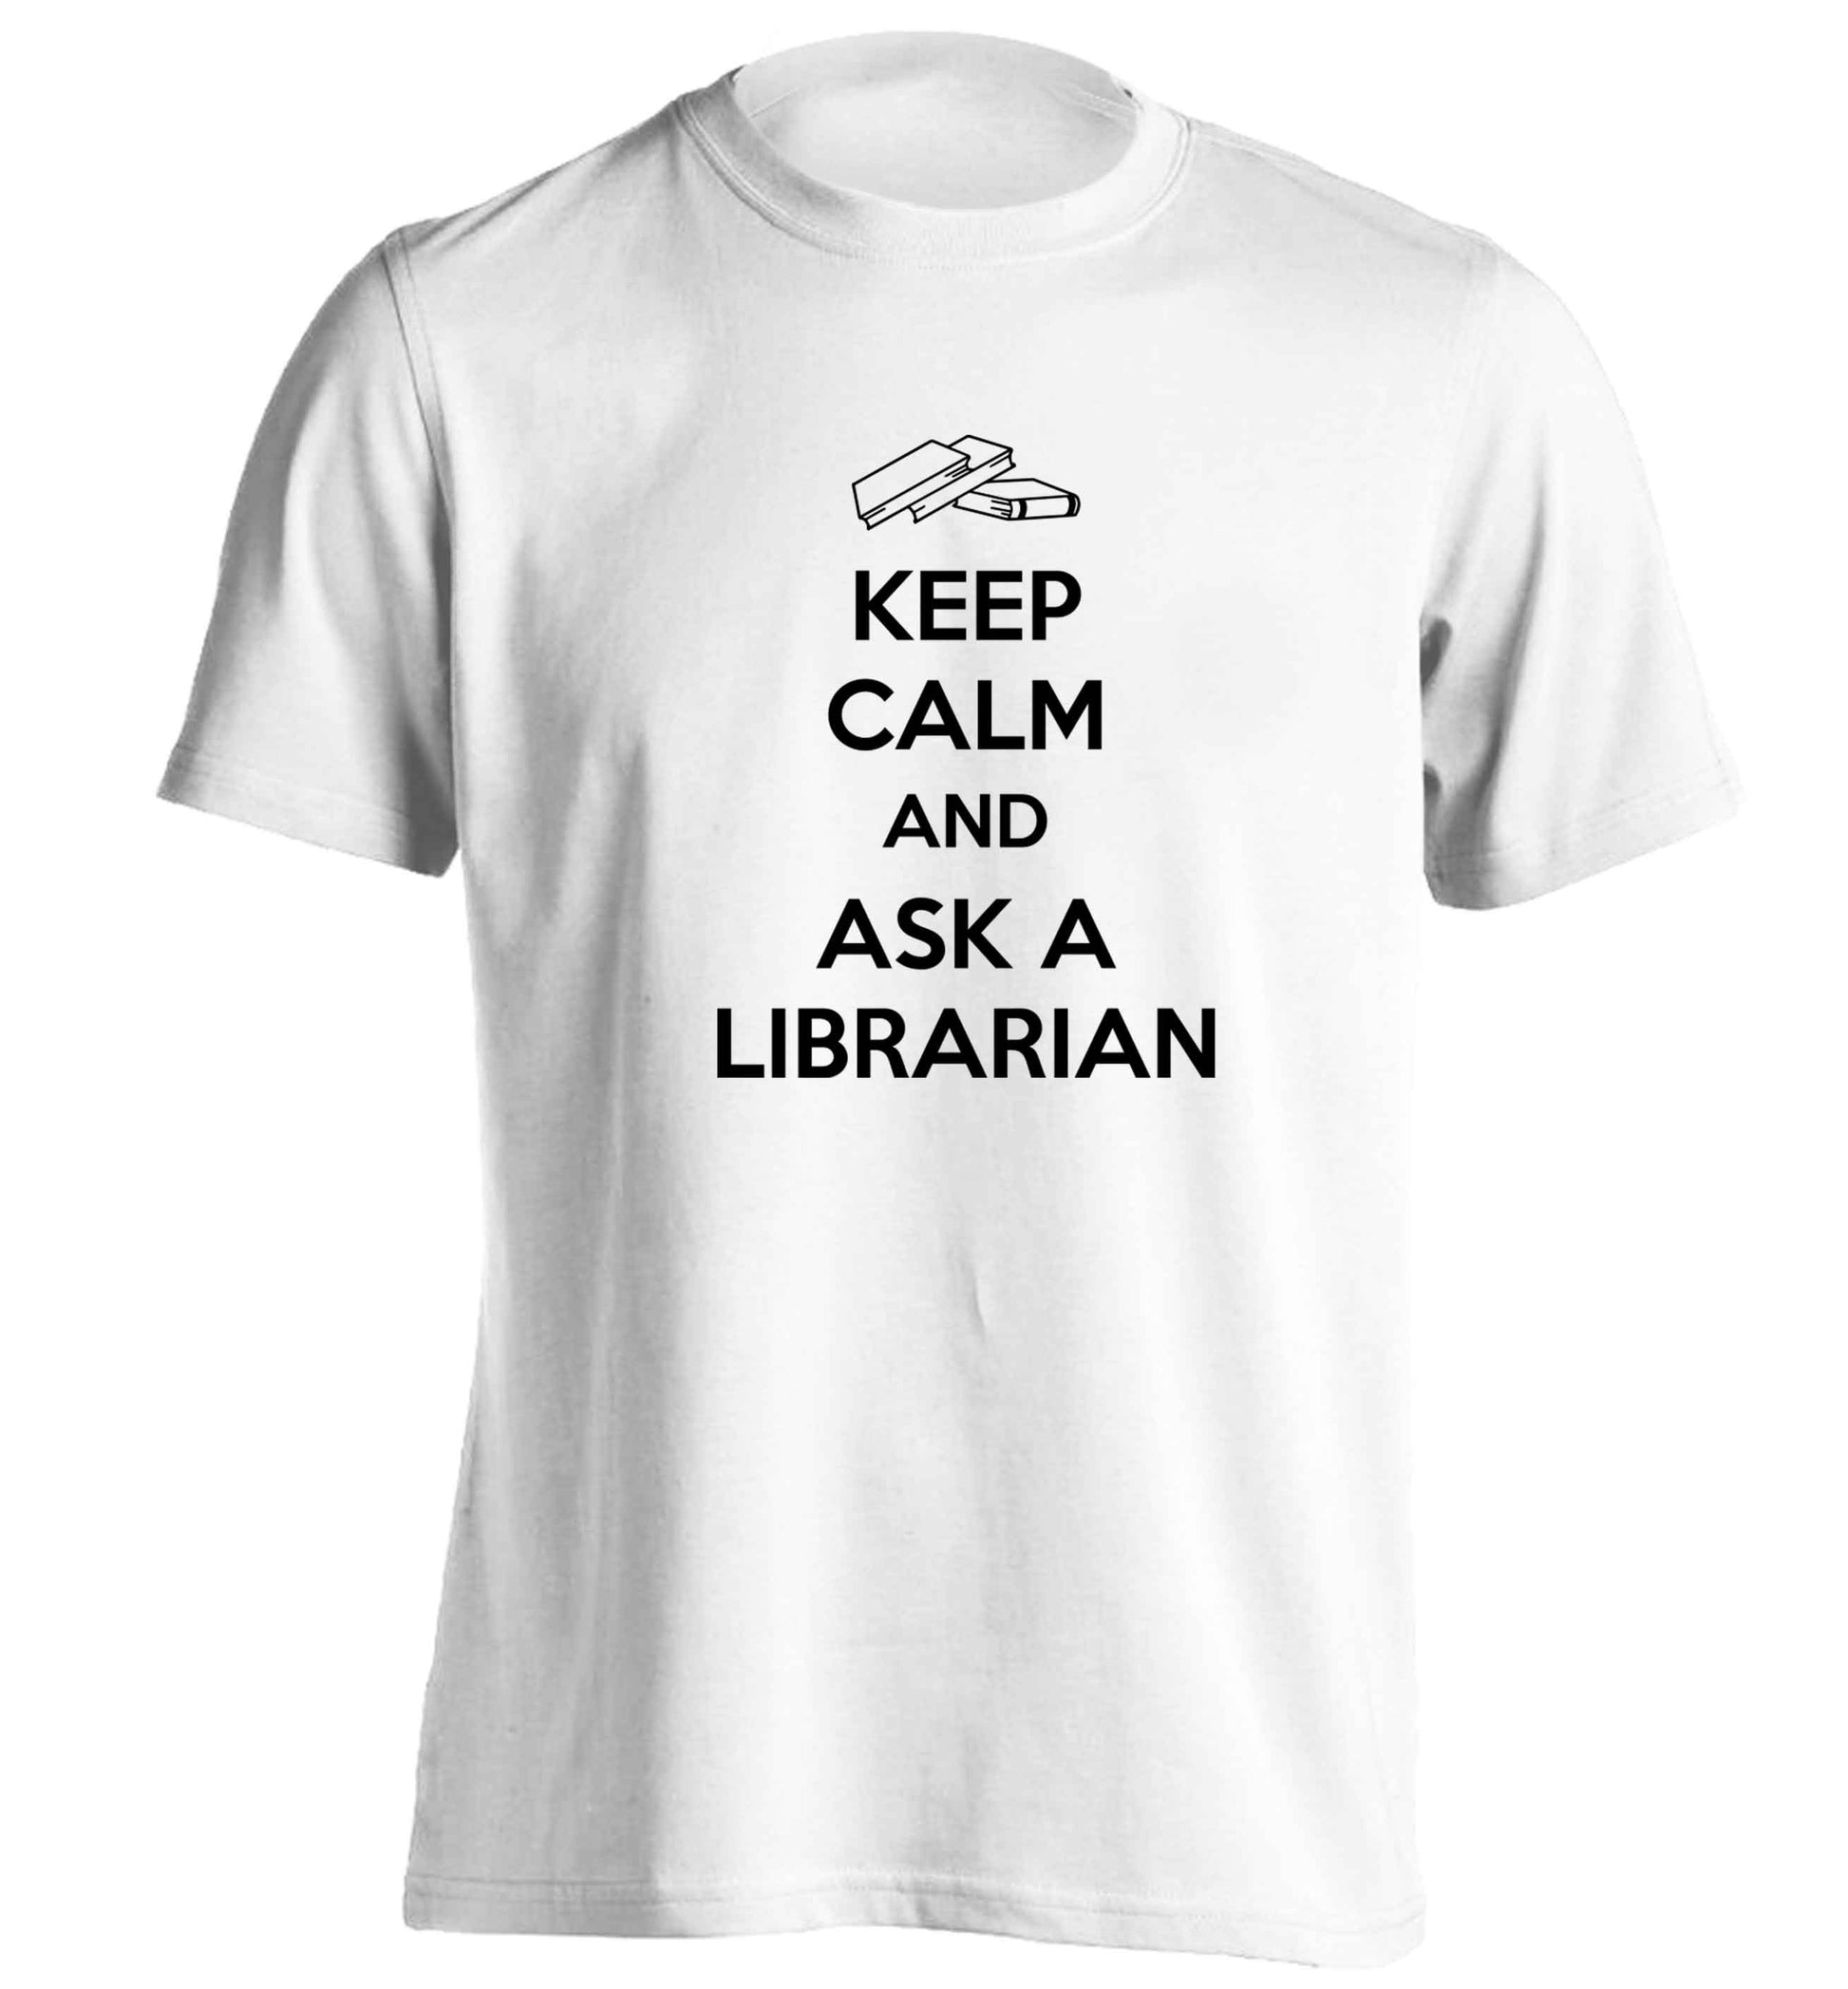 Keep calm and ask a librarian adults unisex white Tshirt 2XL